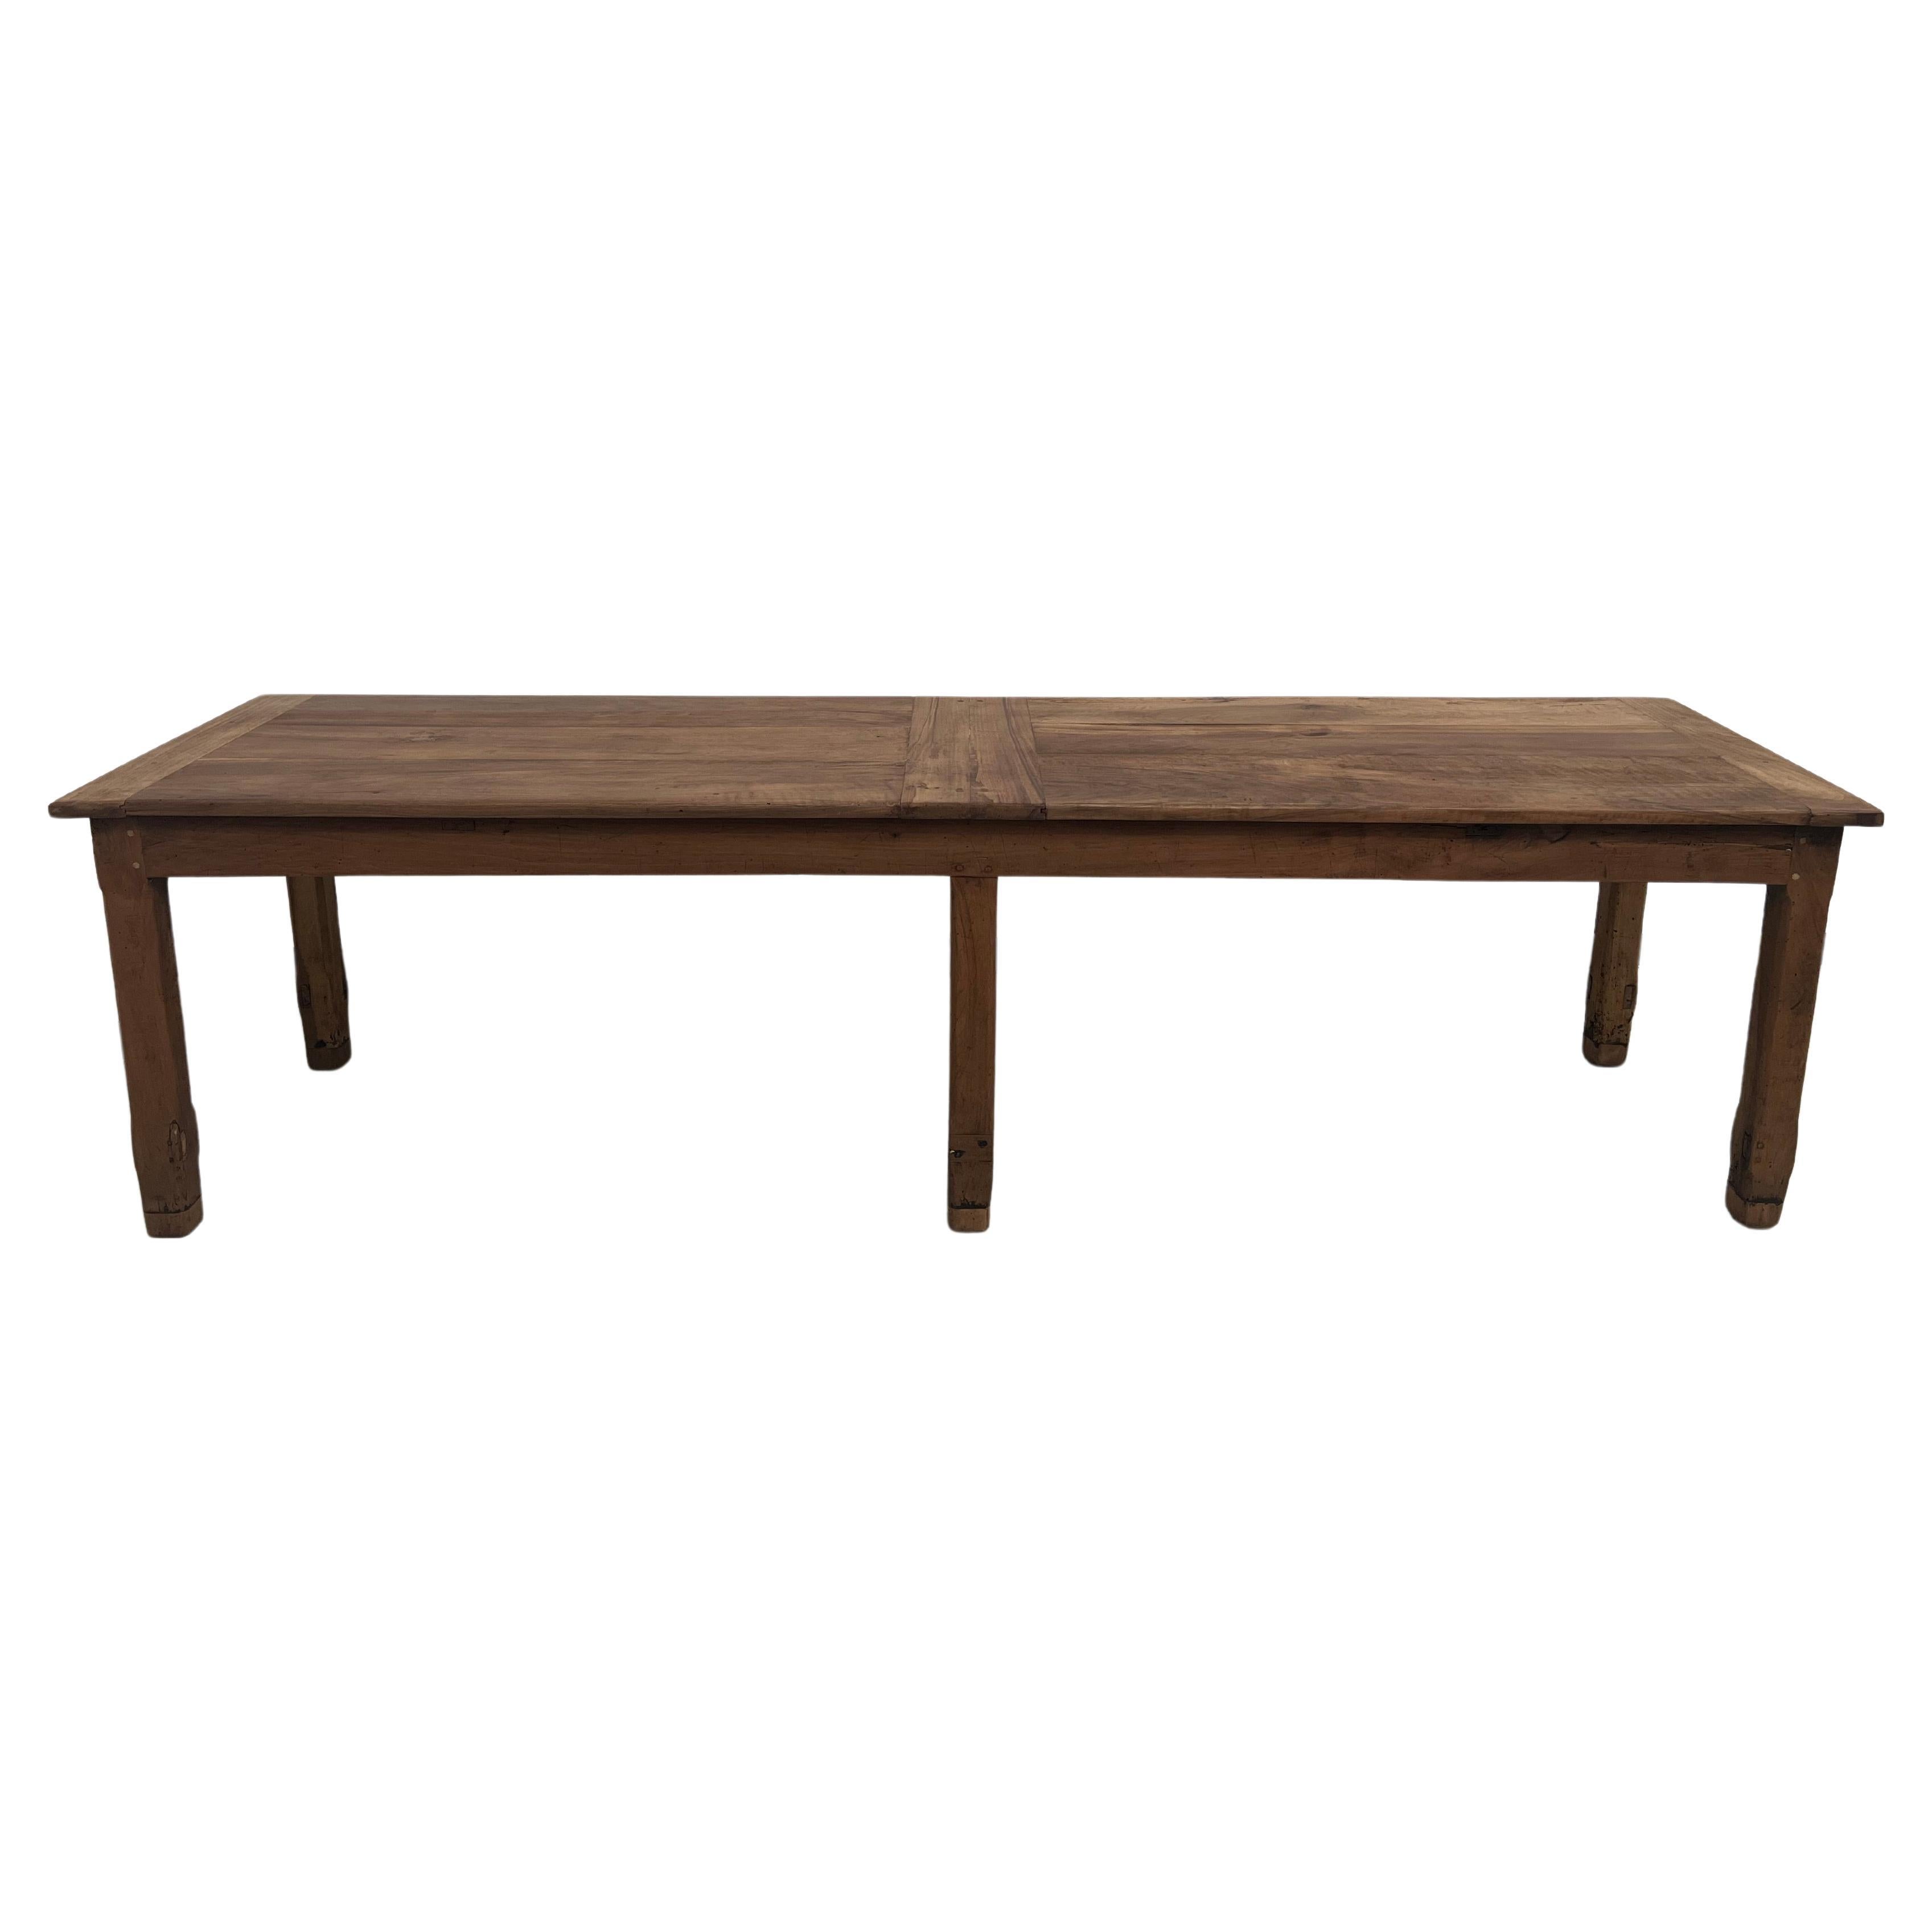 Large french antique walnut farmtable with 6 legs For Sale